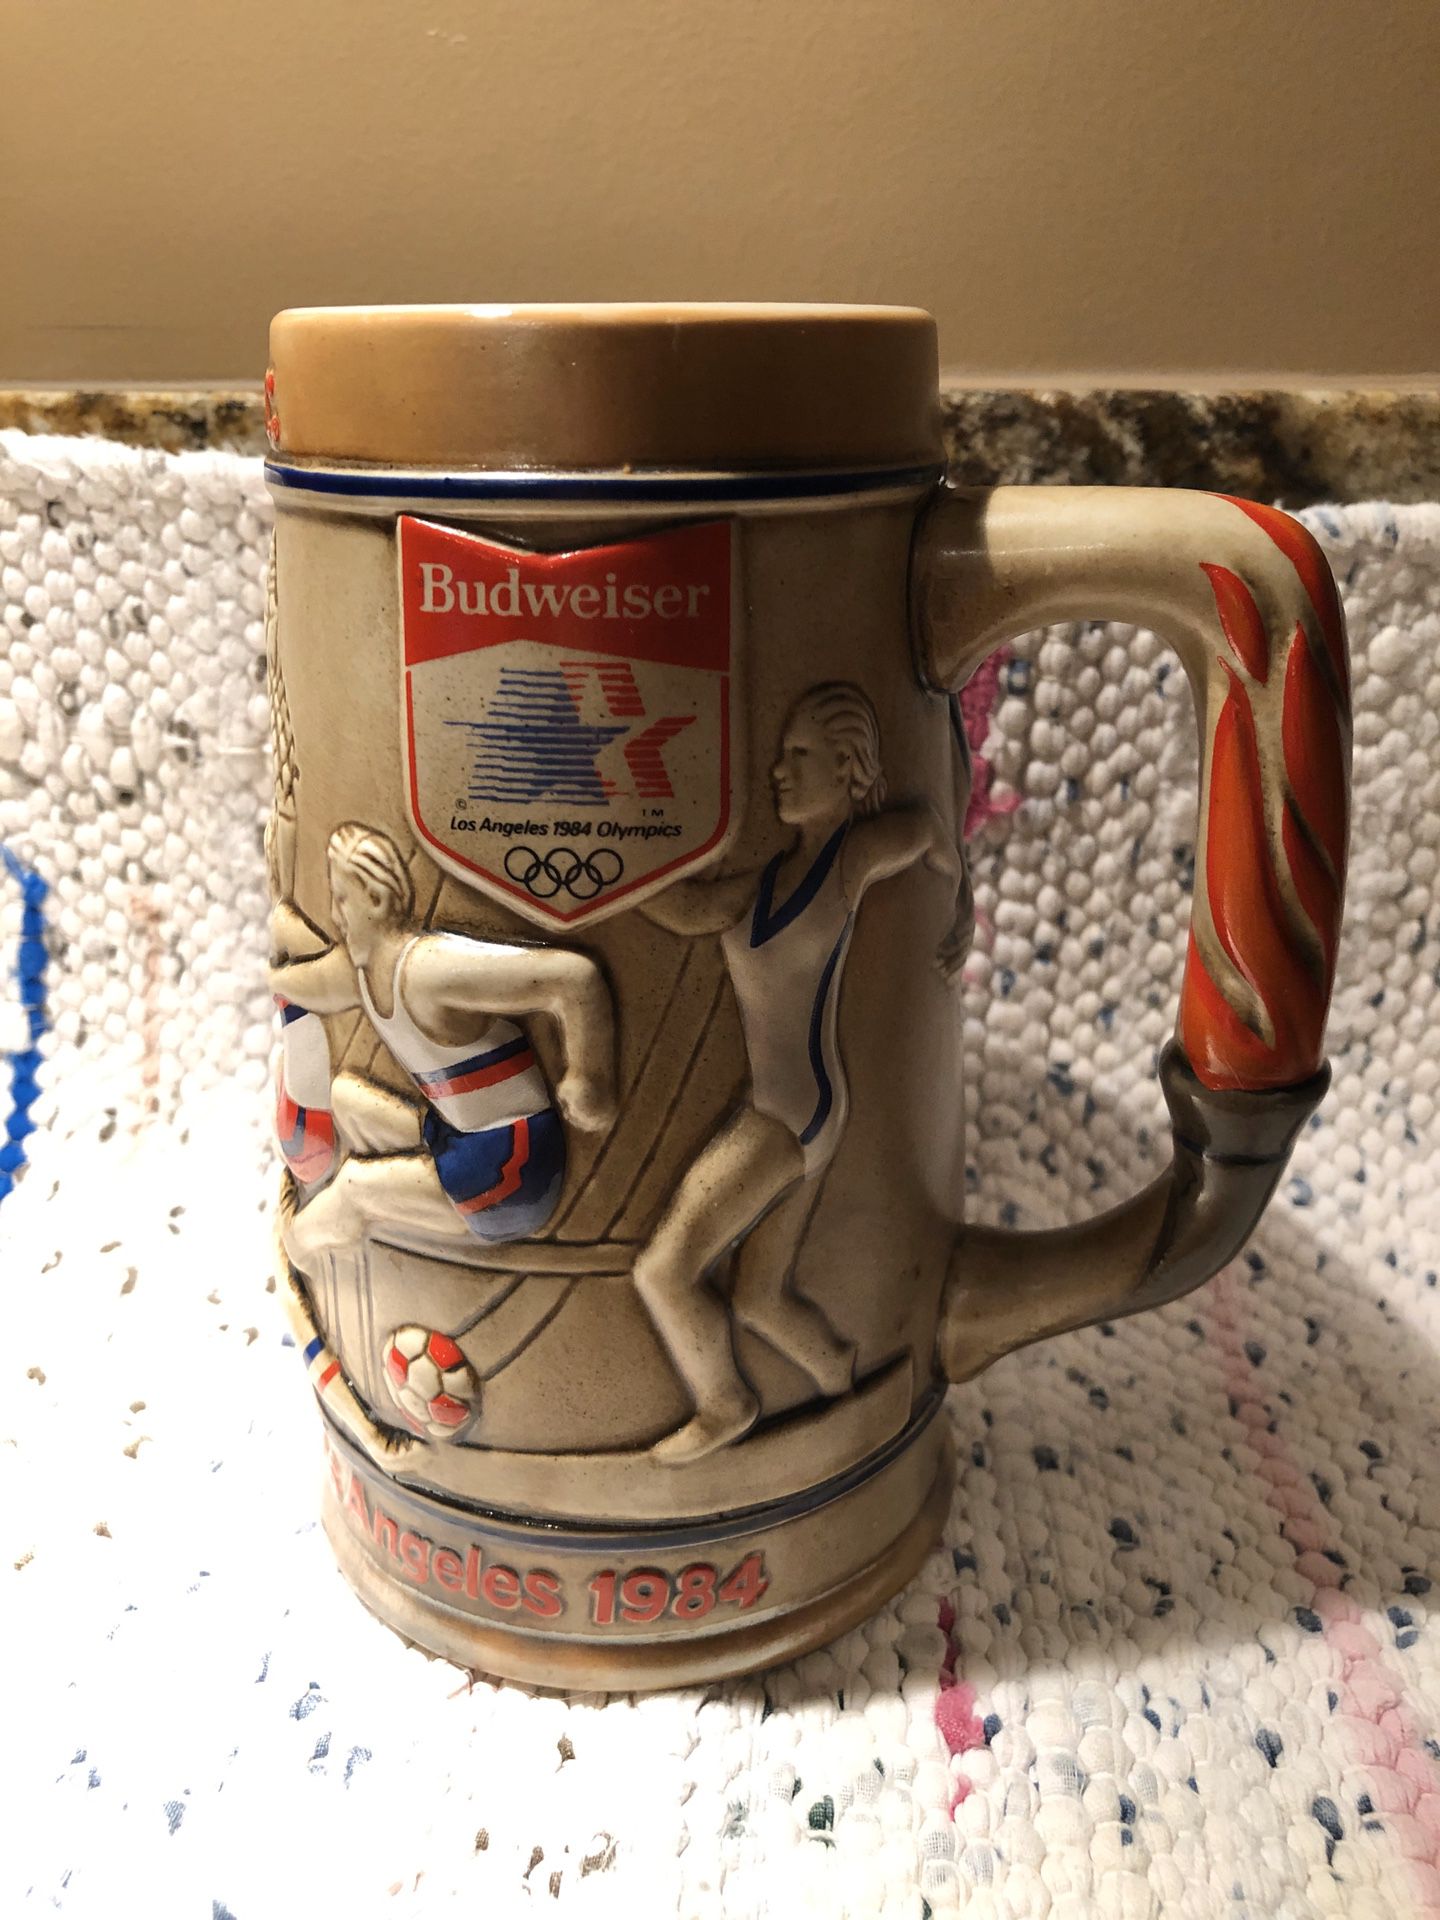 1984 Olympic Beer Stein